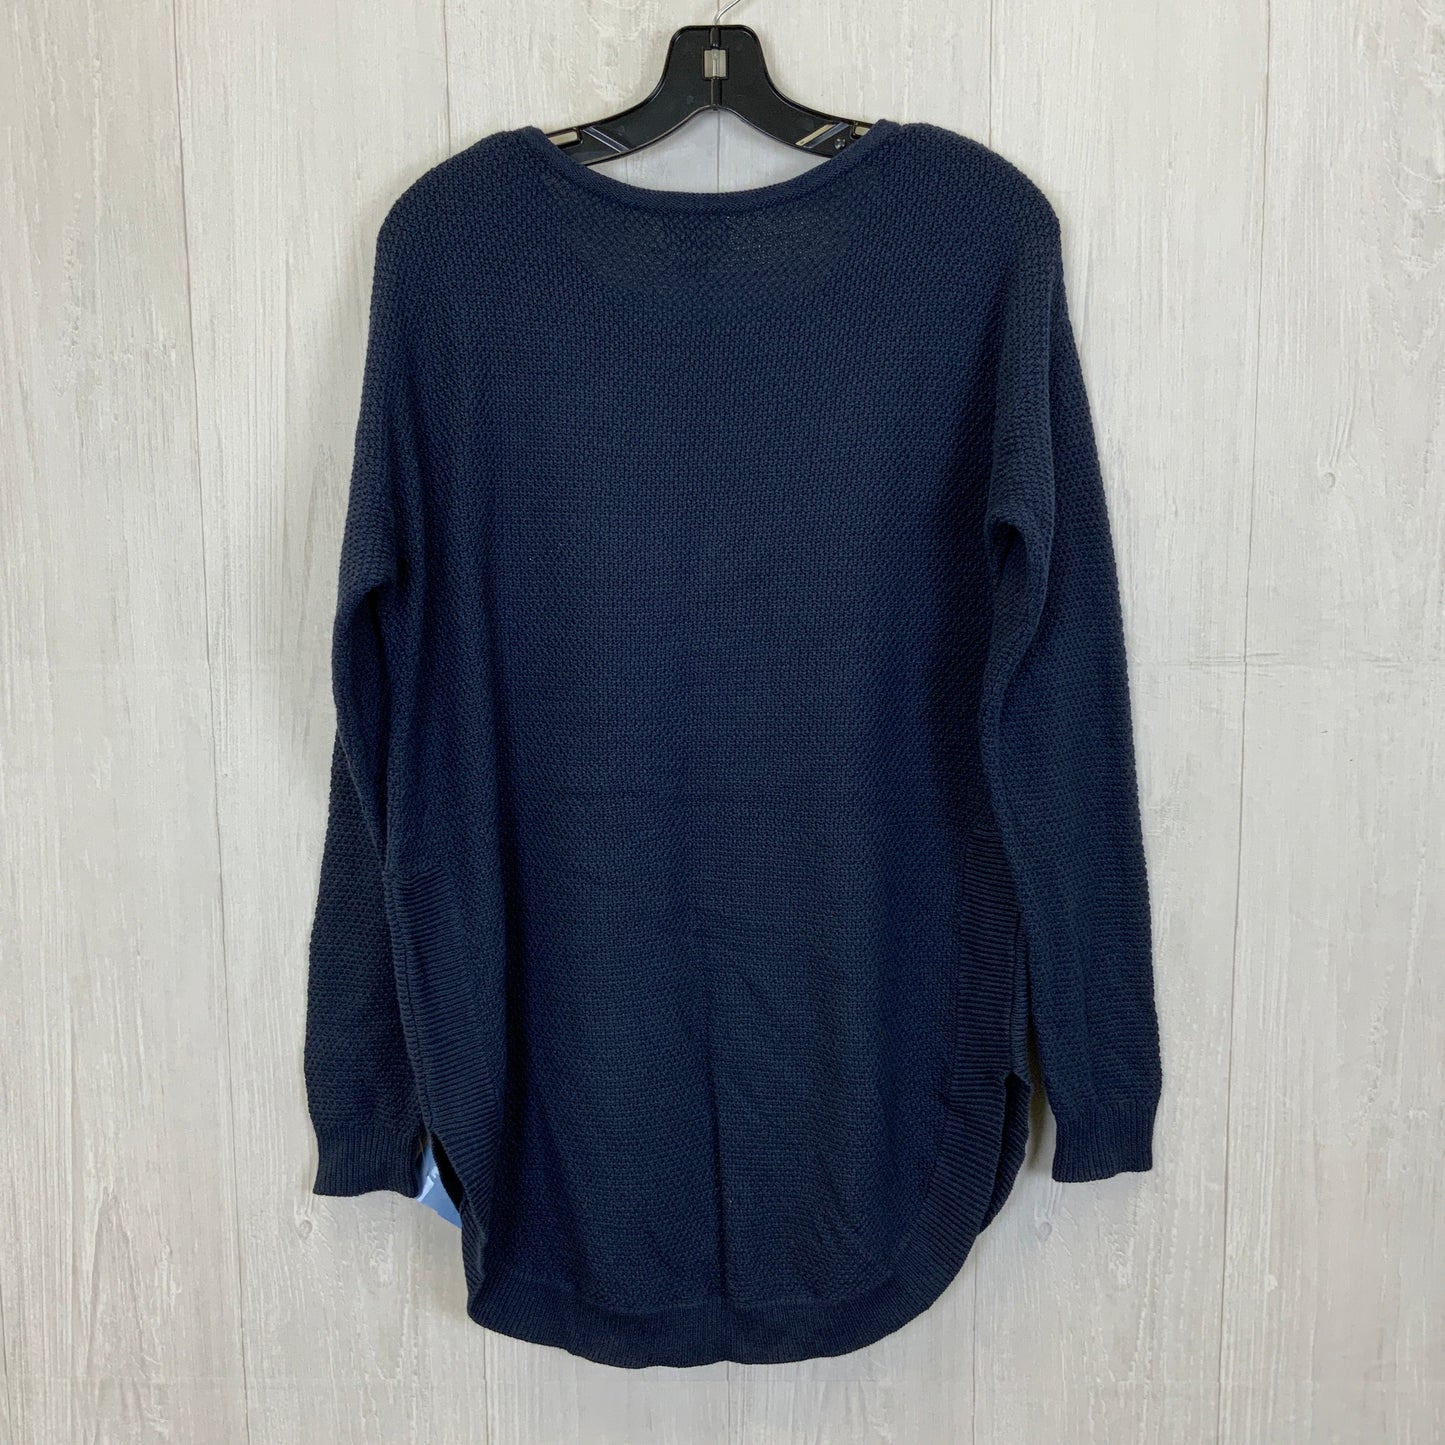 Sweater By Caslon  Size: M